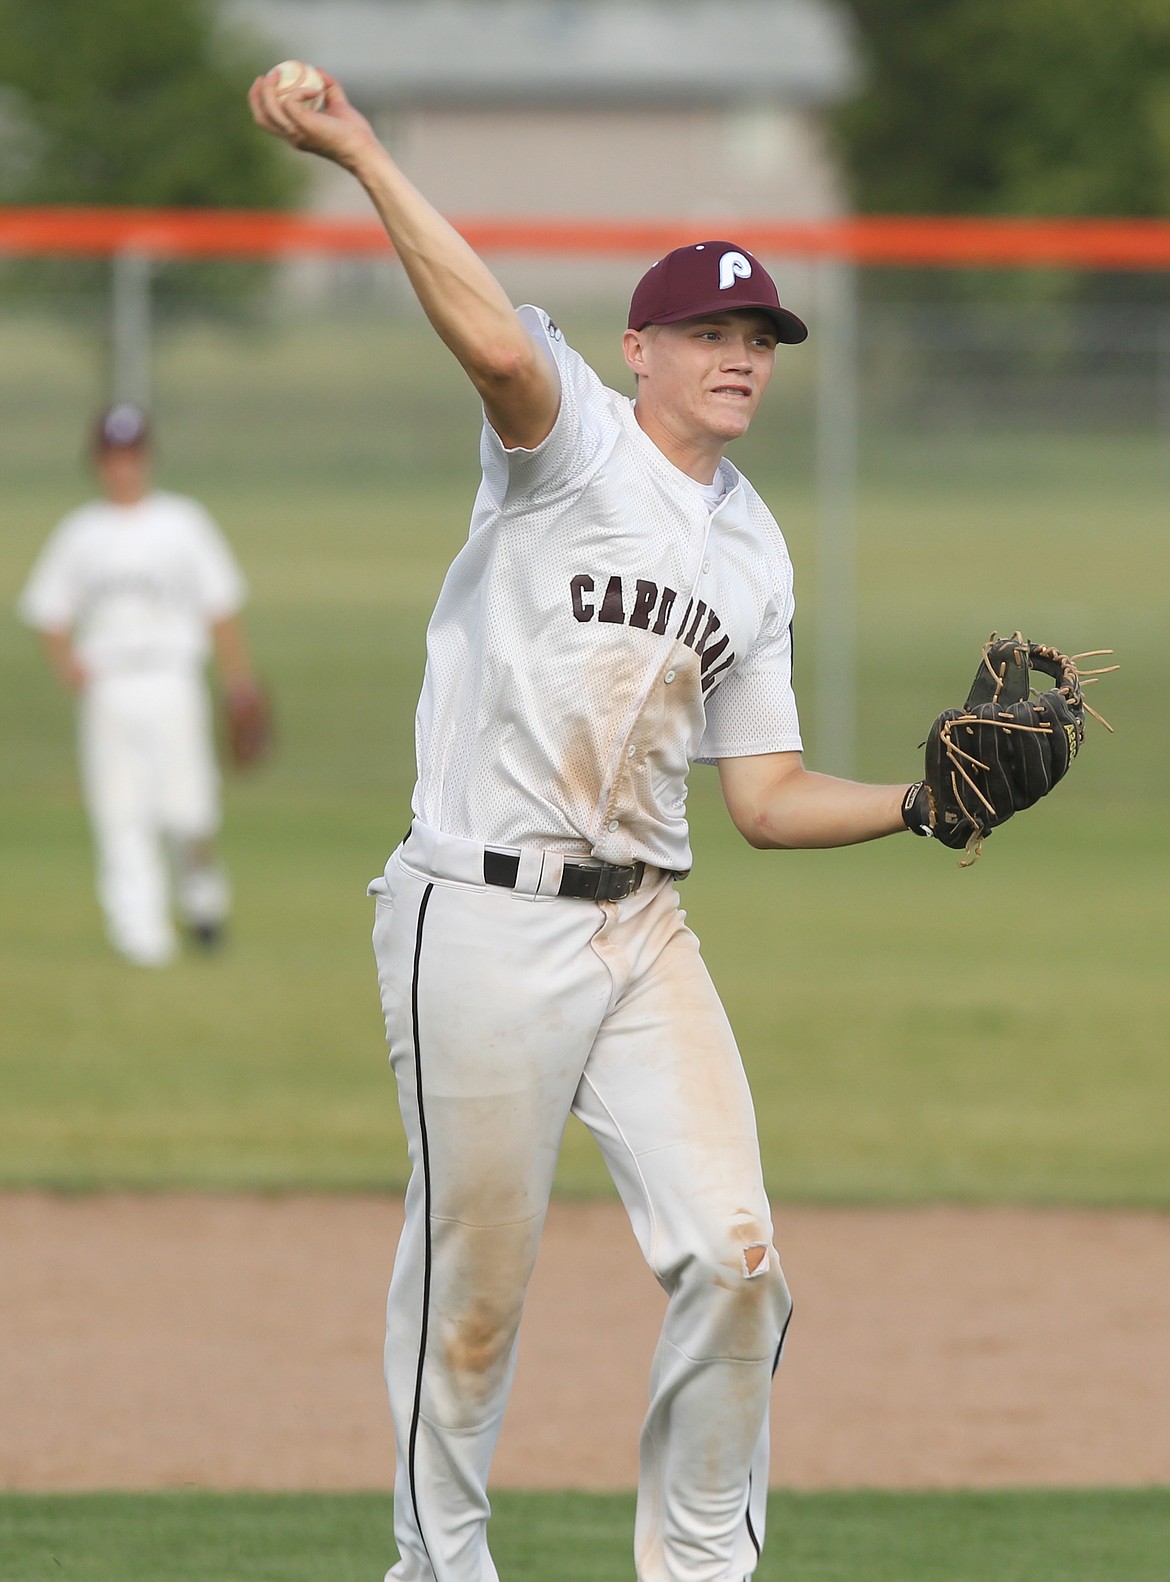 After charging a grounder, Prairie shortstop Tanner McCliment-Call throws to first base against Coeur d&#146;Alene.